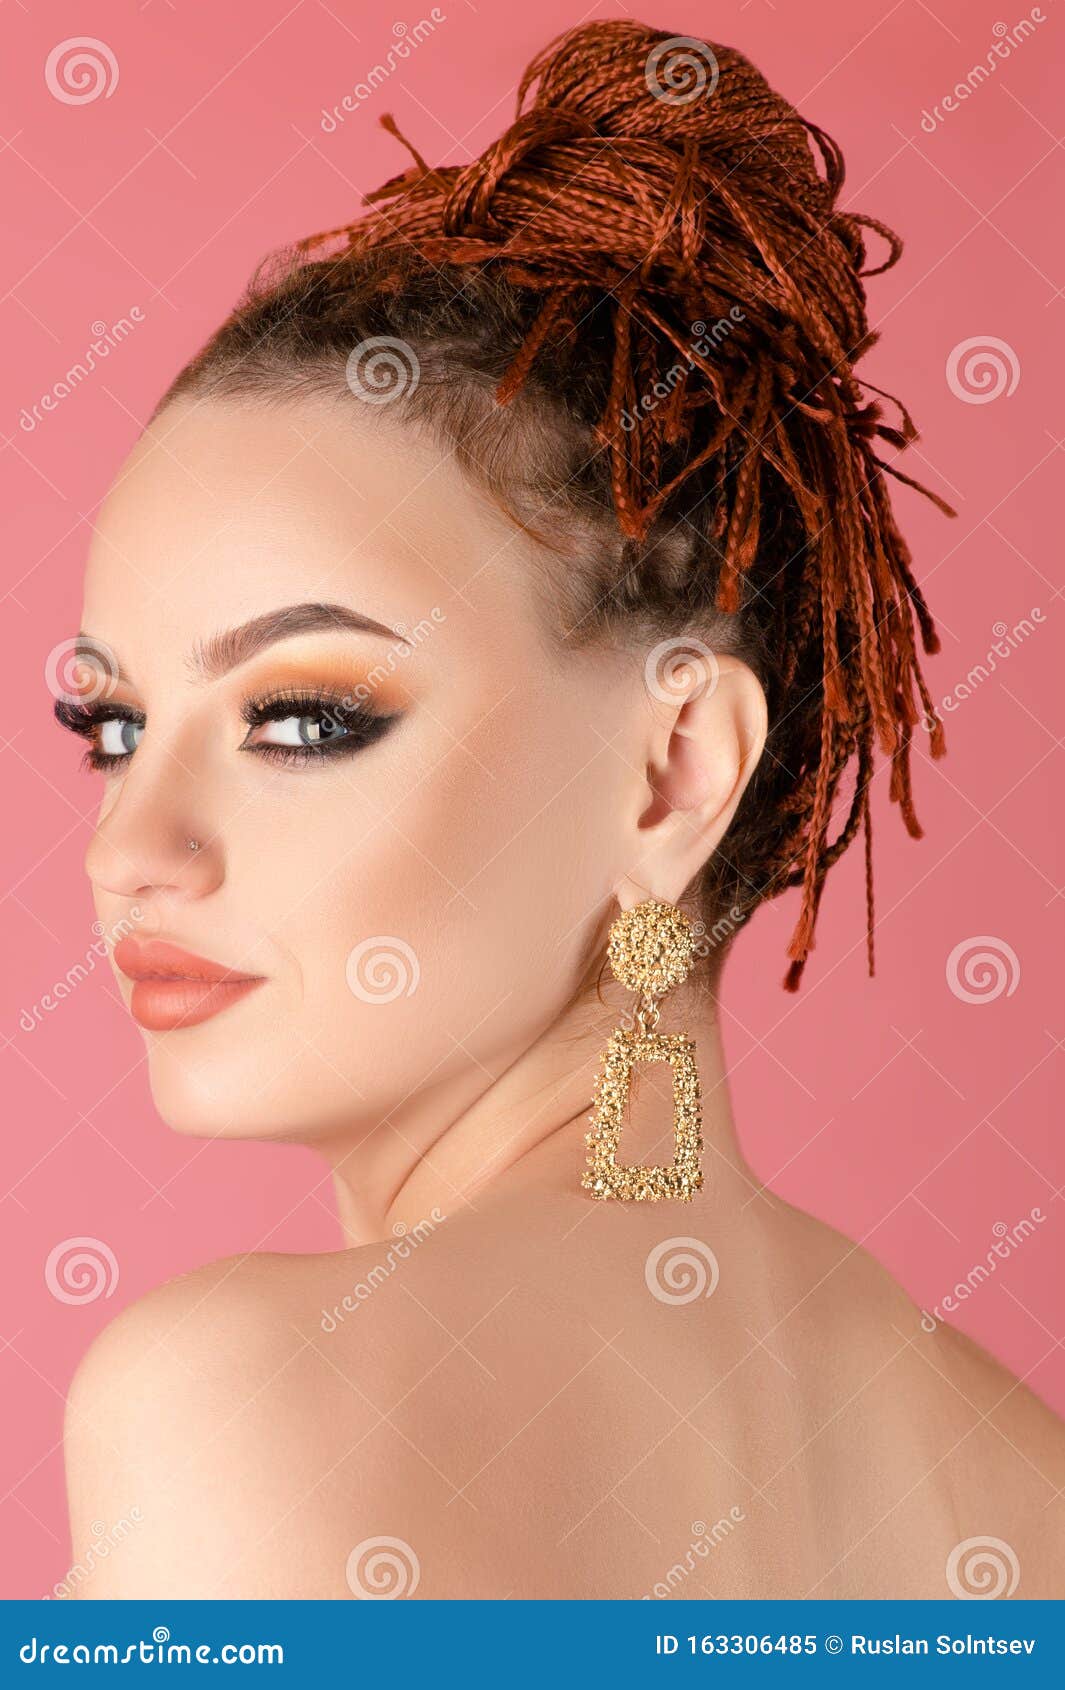 Portrait Of Beautiful Woman With Nude Makeup Stock Image 